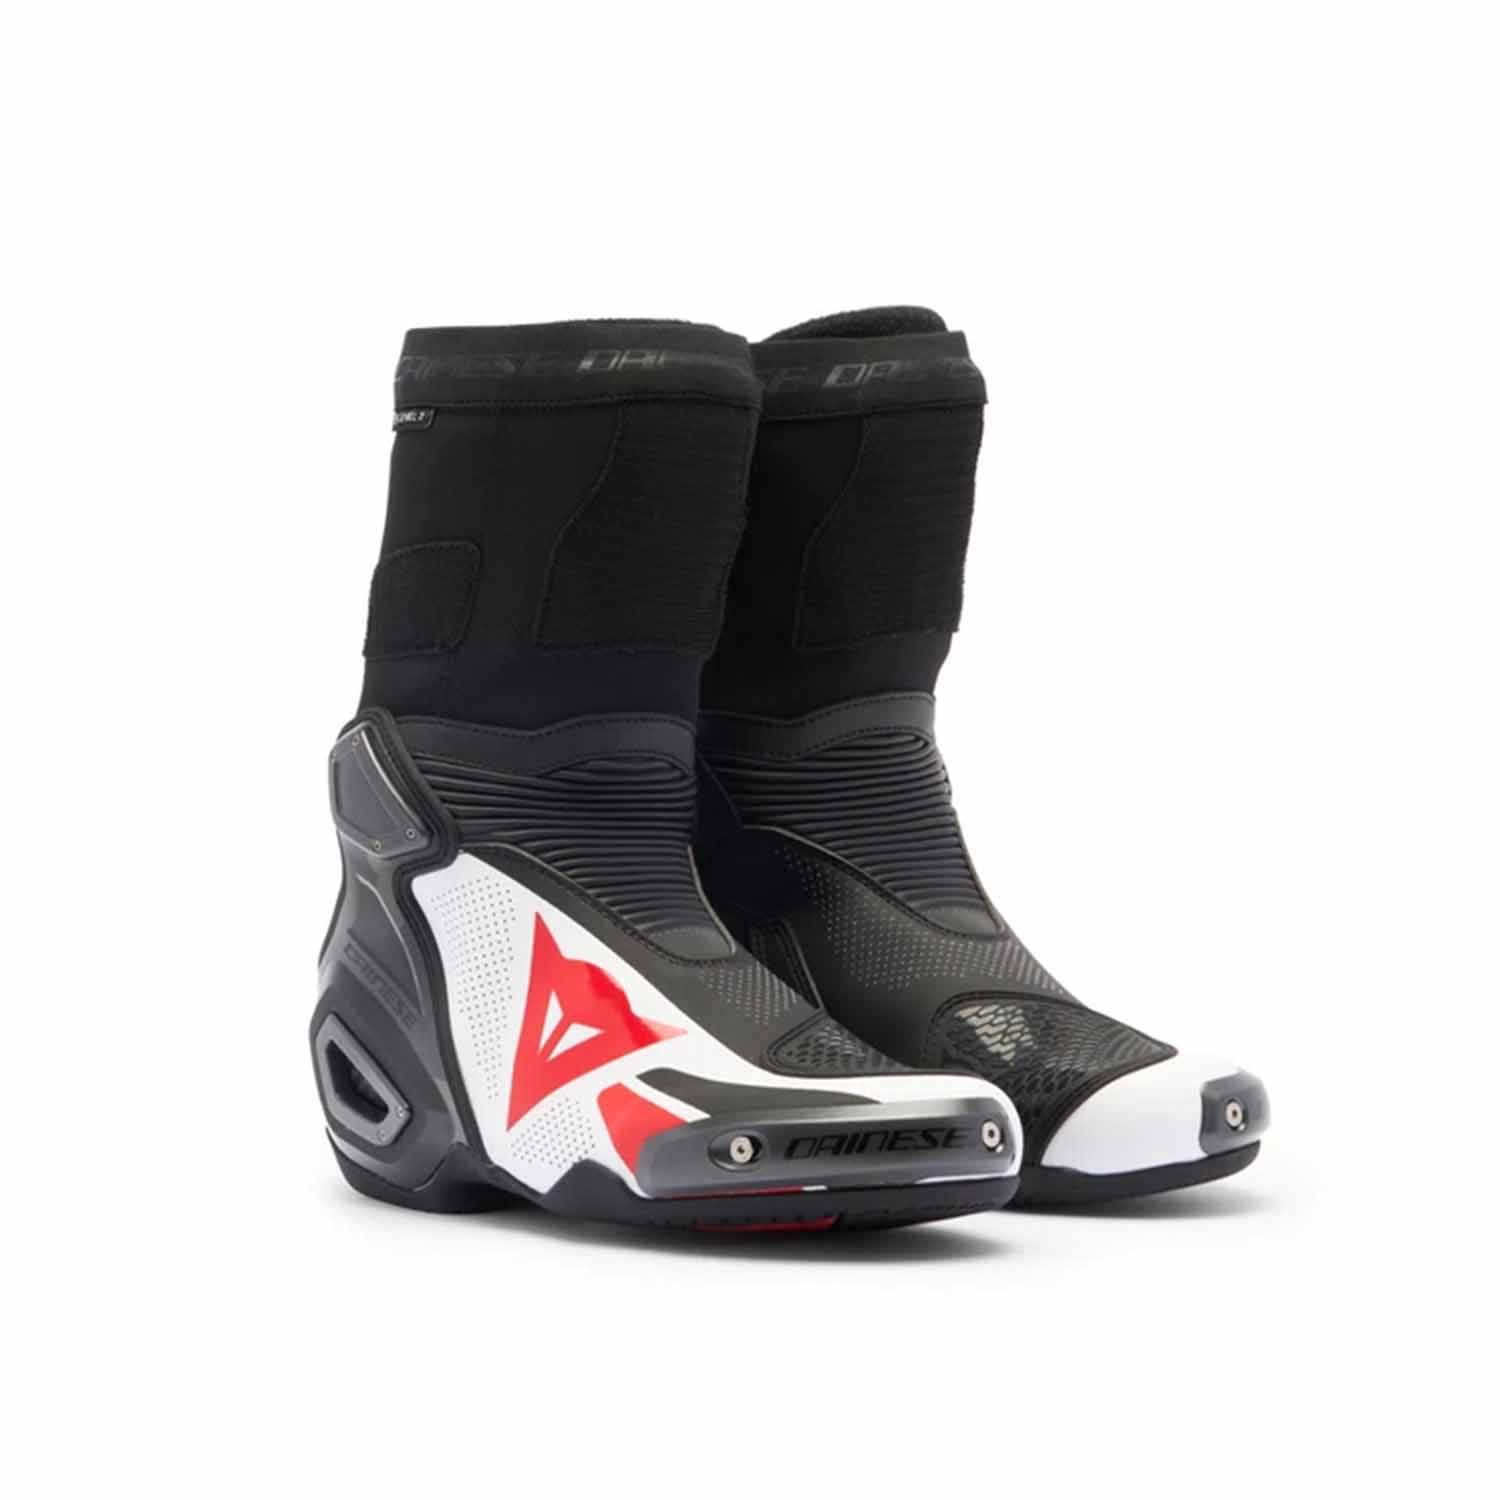 Image of Dainese Axial 2 Air Boots Black White Lava Red Size 40 EN